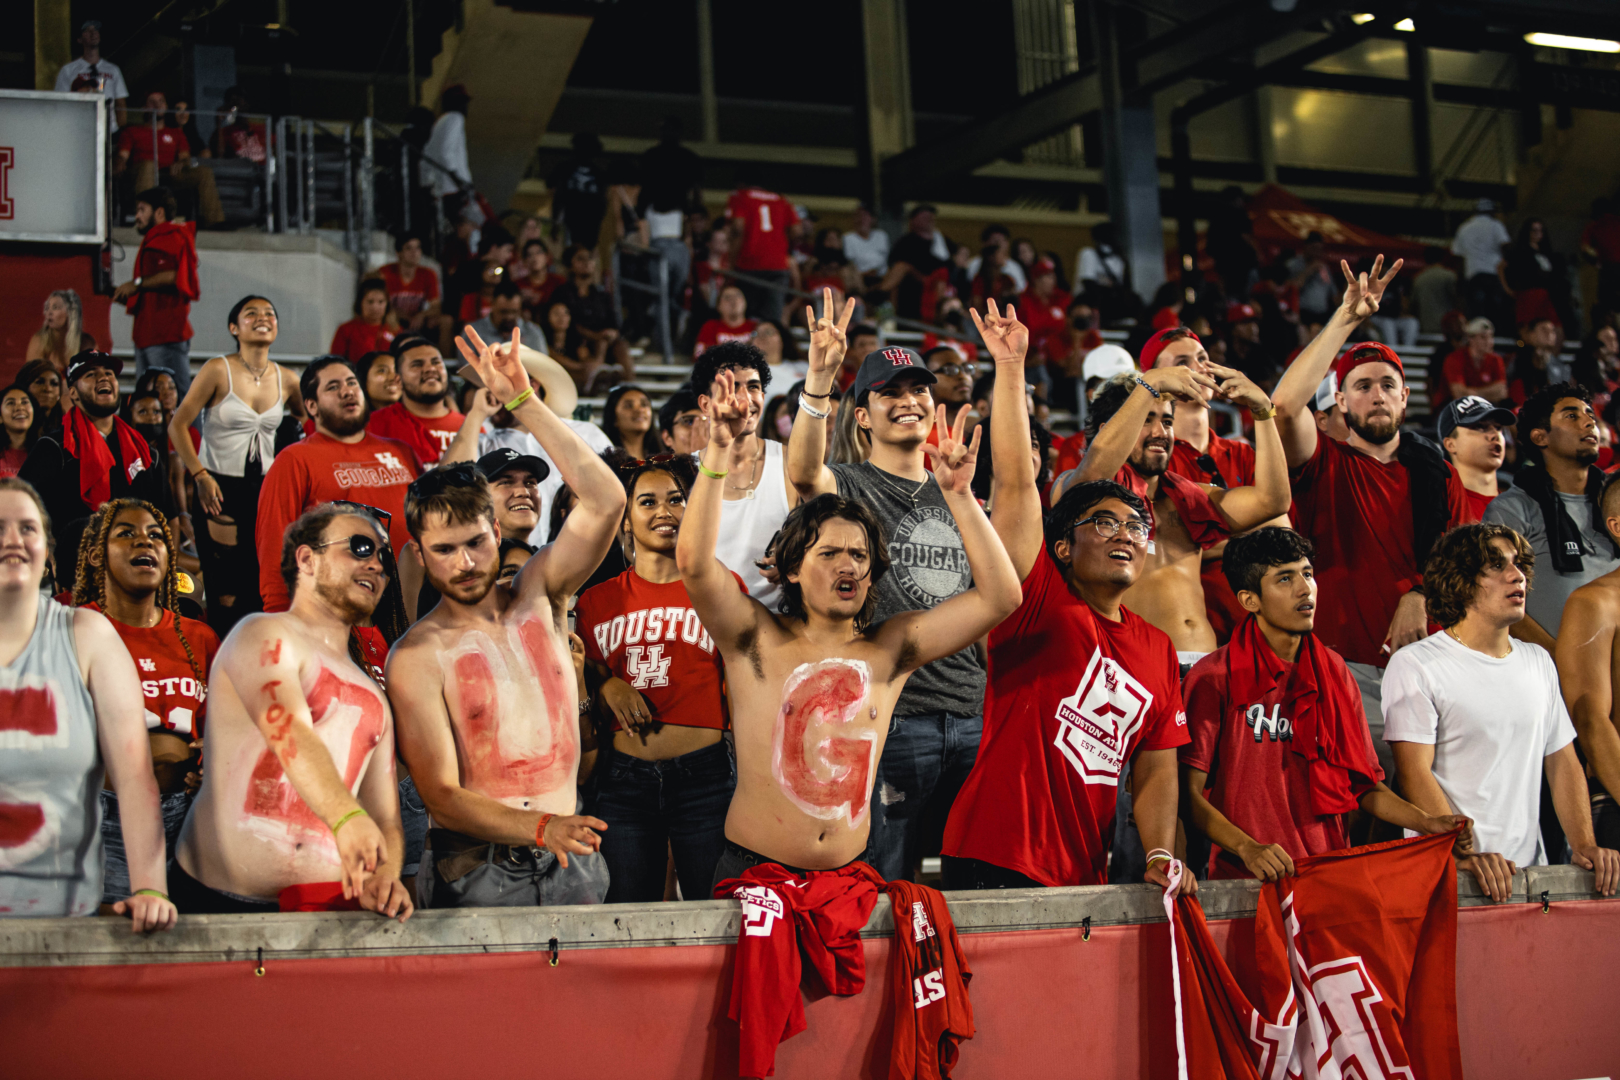 UH students cheer on the football team during the Cougars' route of Grambling State at TDECU Stadium. | James Schillinger/The Cougar